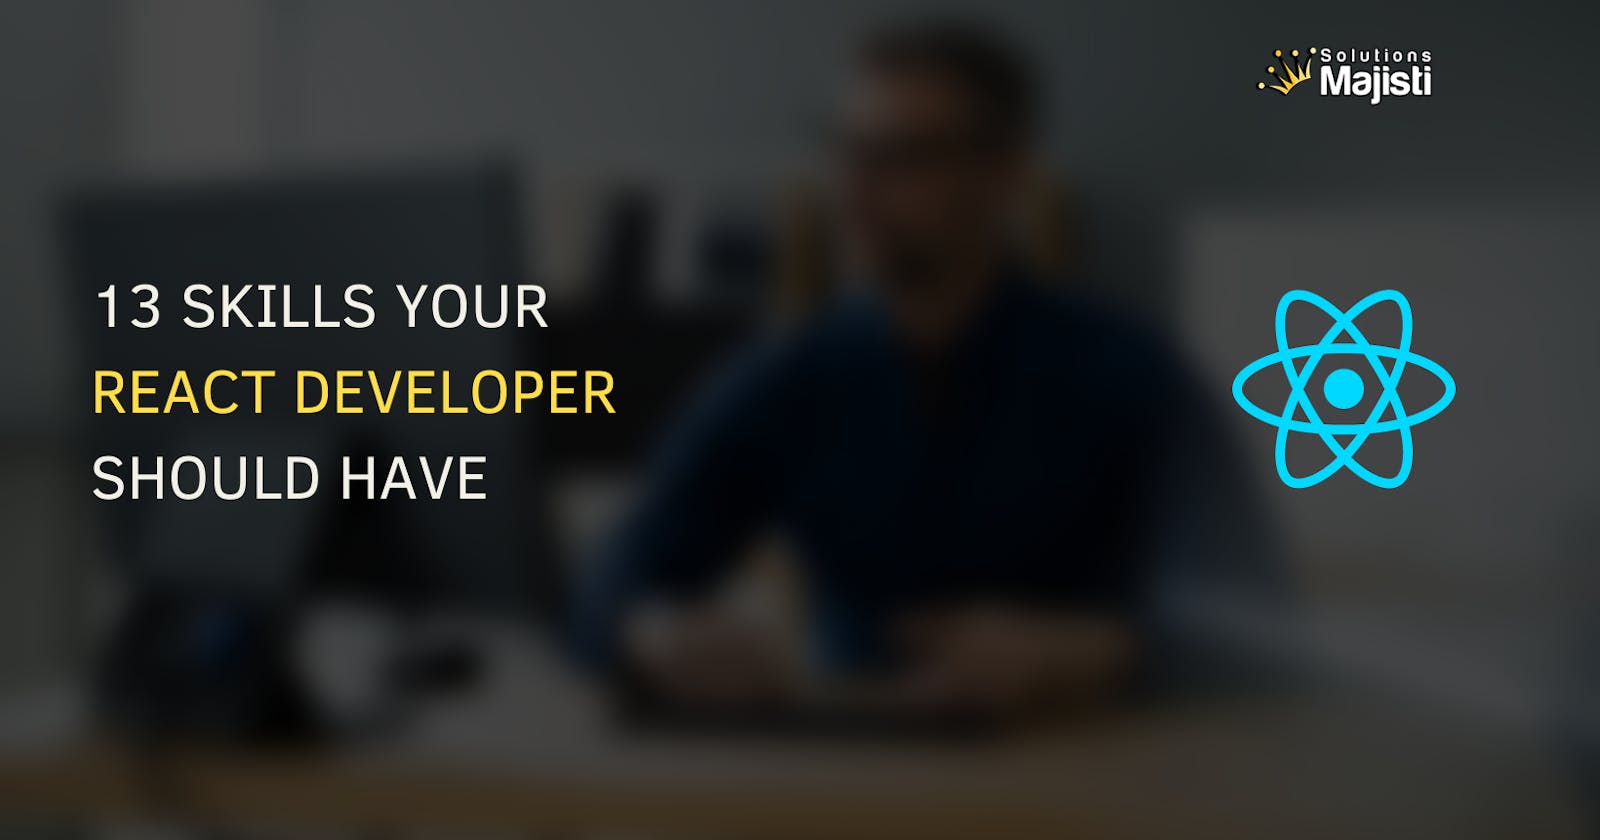 13 Skills To Look For When Hiring a React Developer